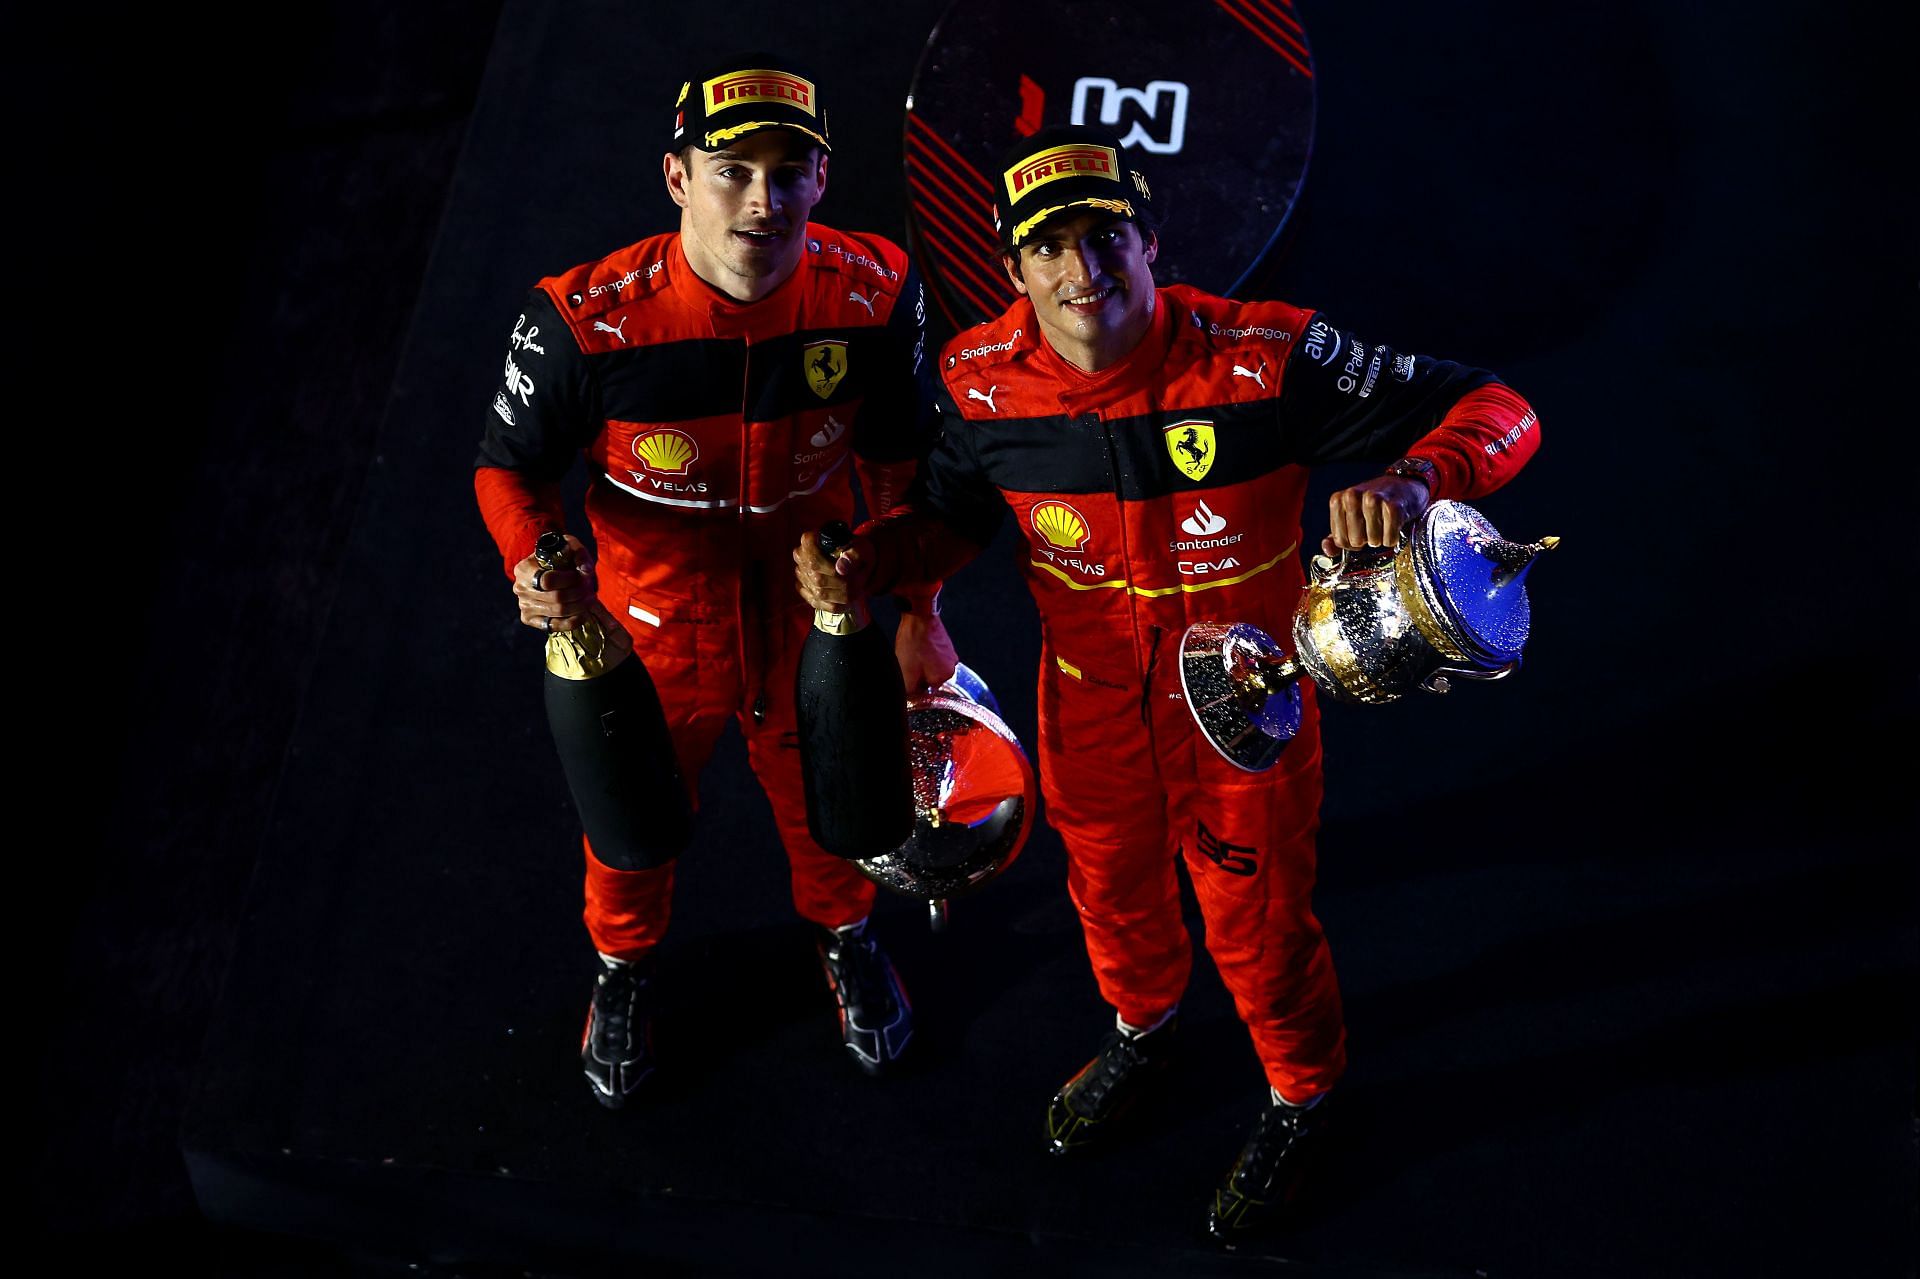 Charles Leclerc (left) and Carlos Sainz (right) at the F1 Grand Prix of Bahrain